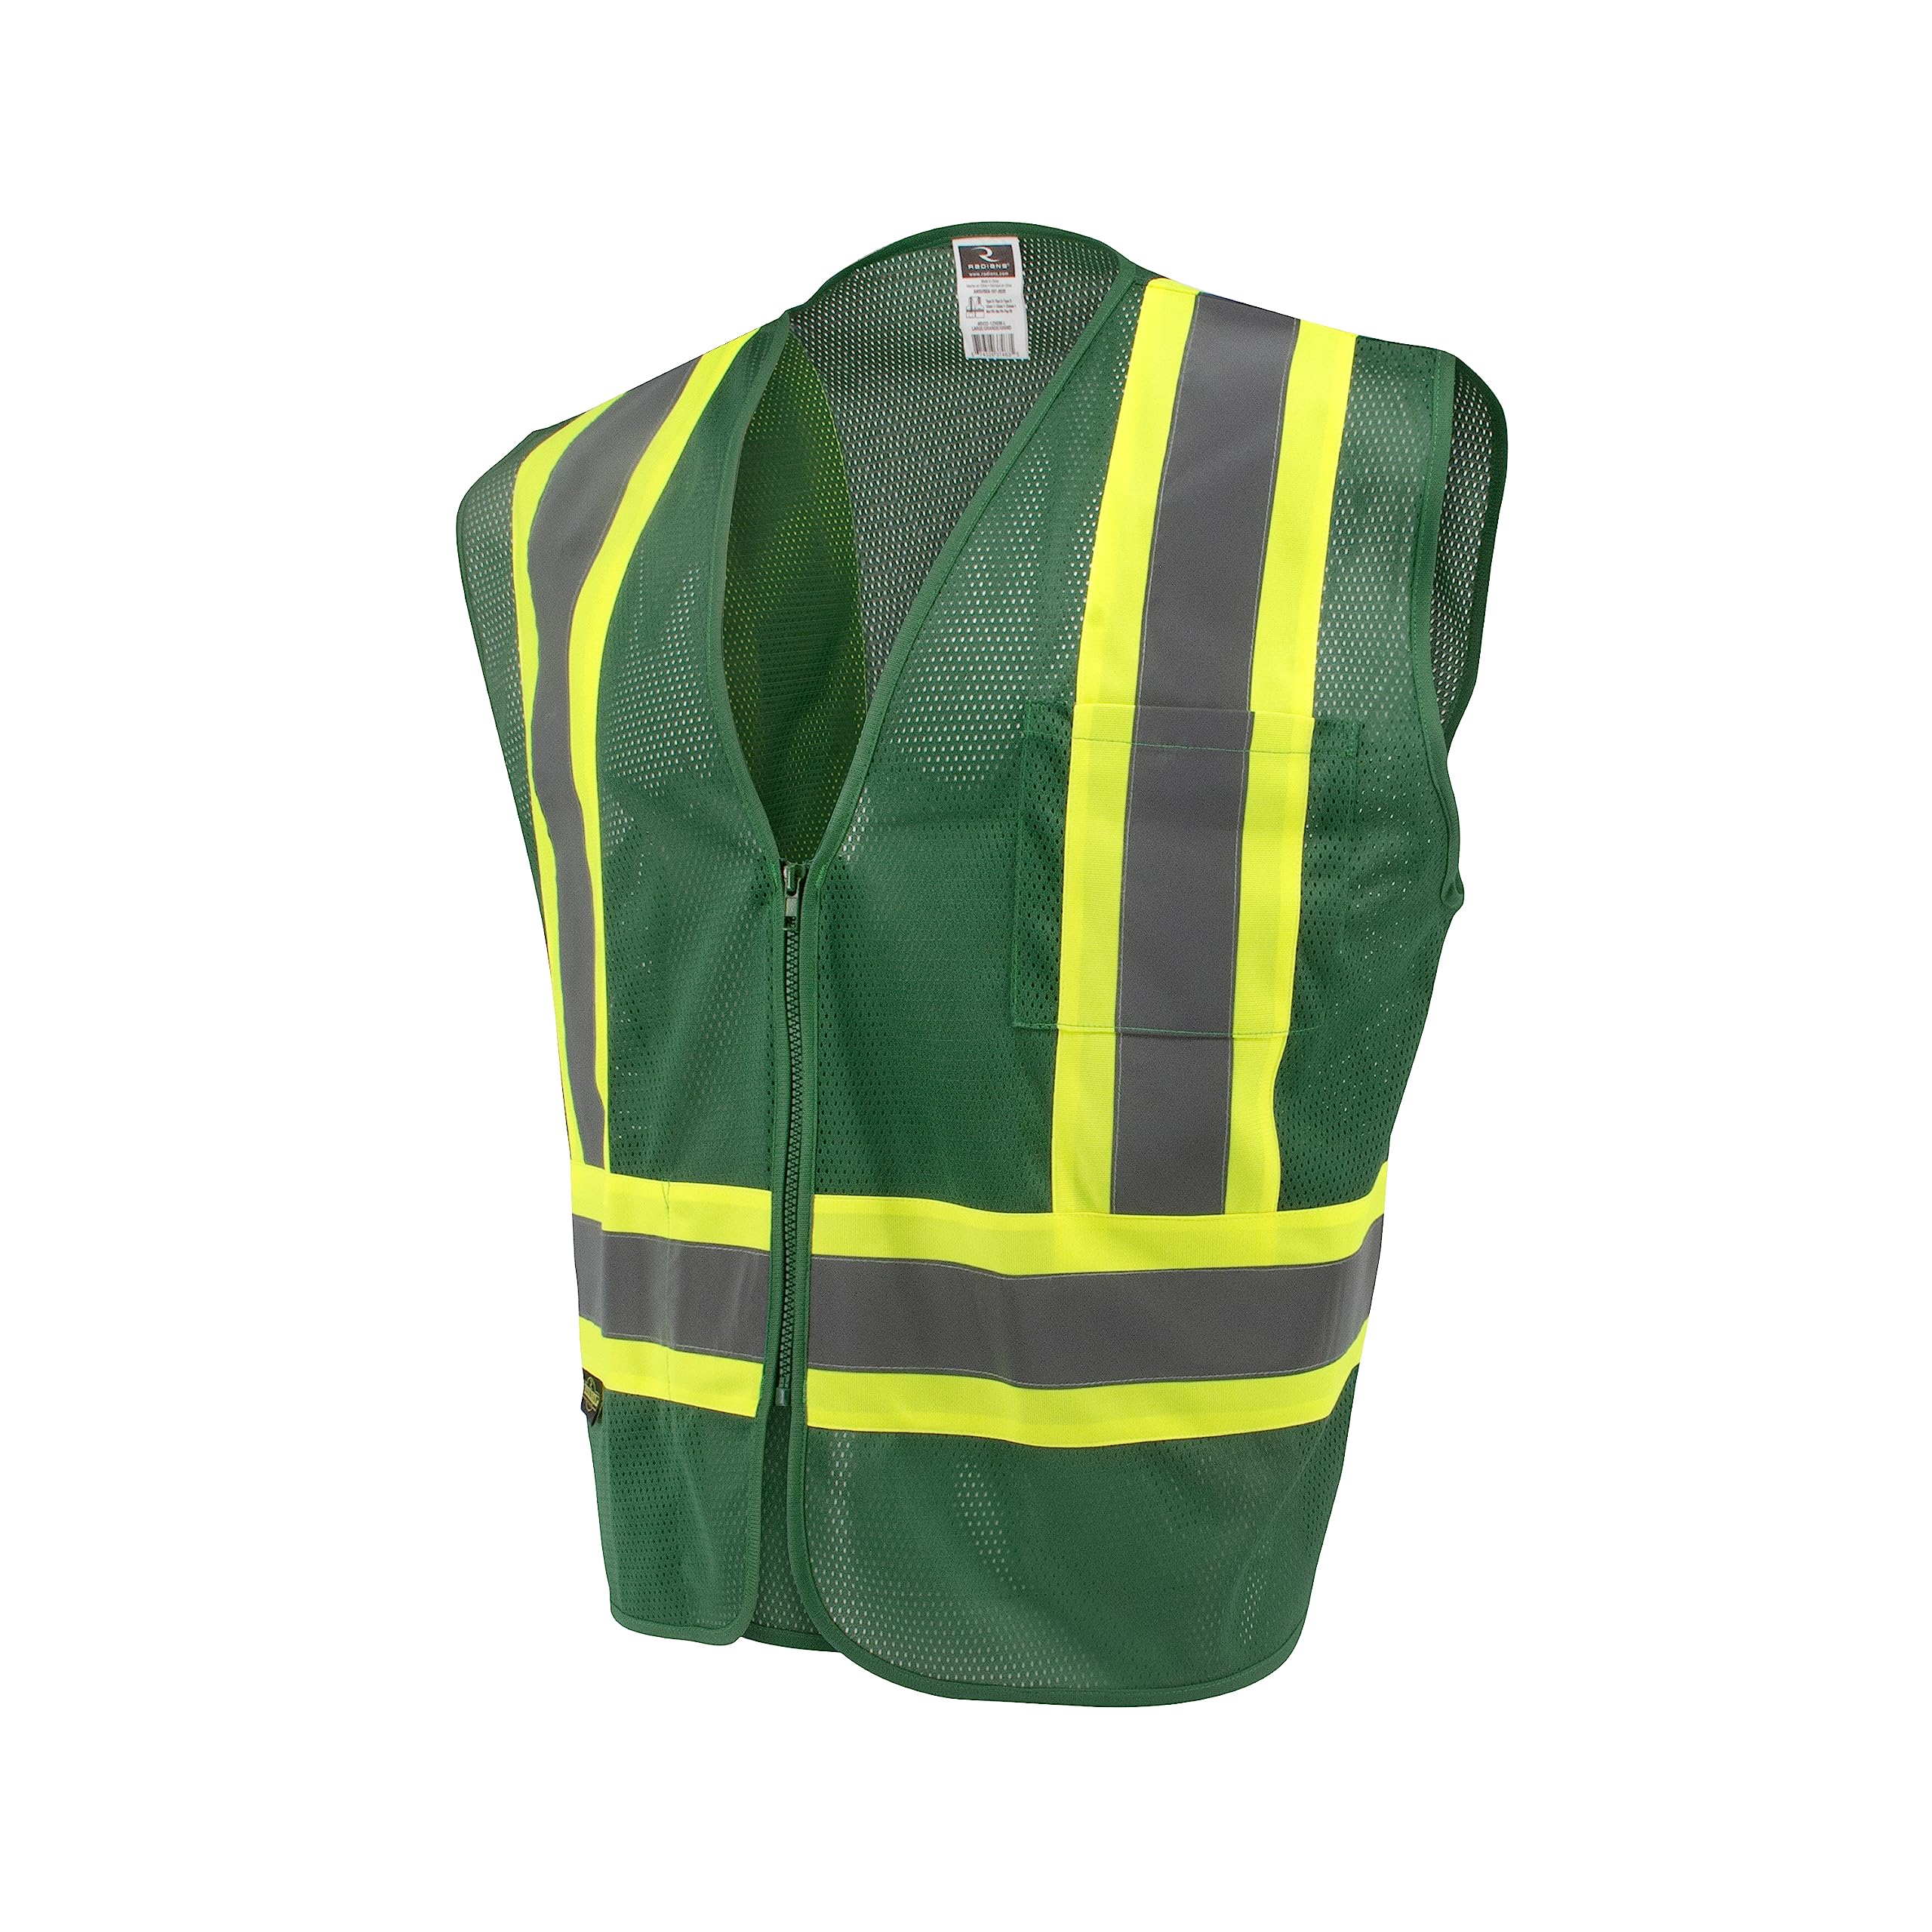 Radians SV22-1 Economy Type O Class 1 Safety Vest Size Large, Hunter Green Mesh with Contrasting Tape - 1 Each